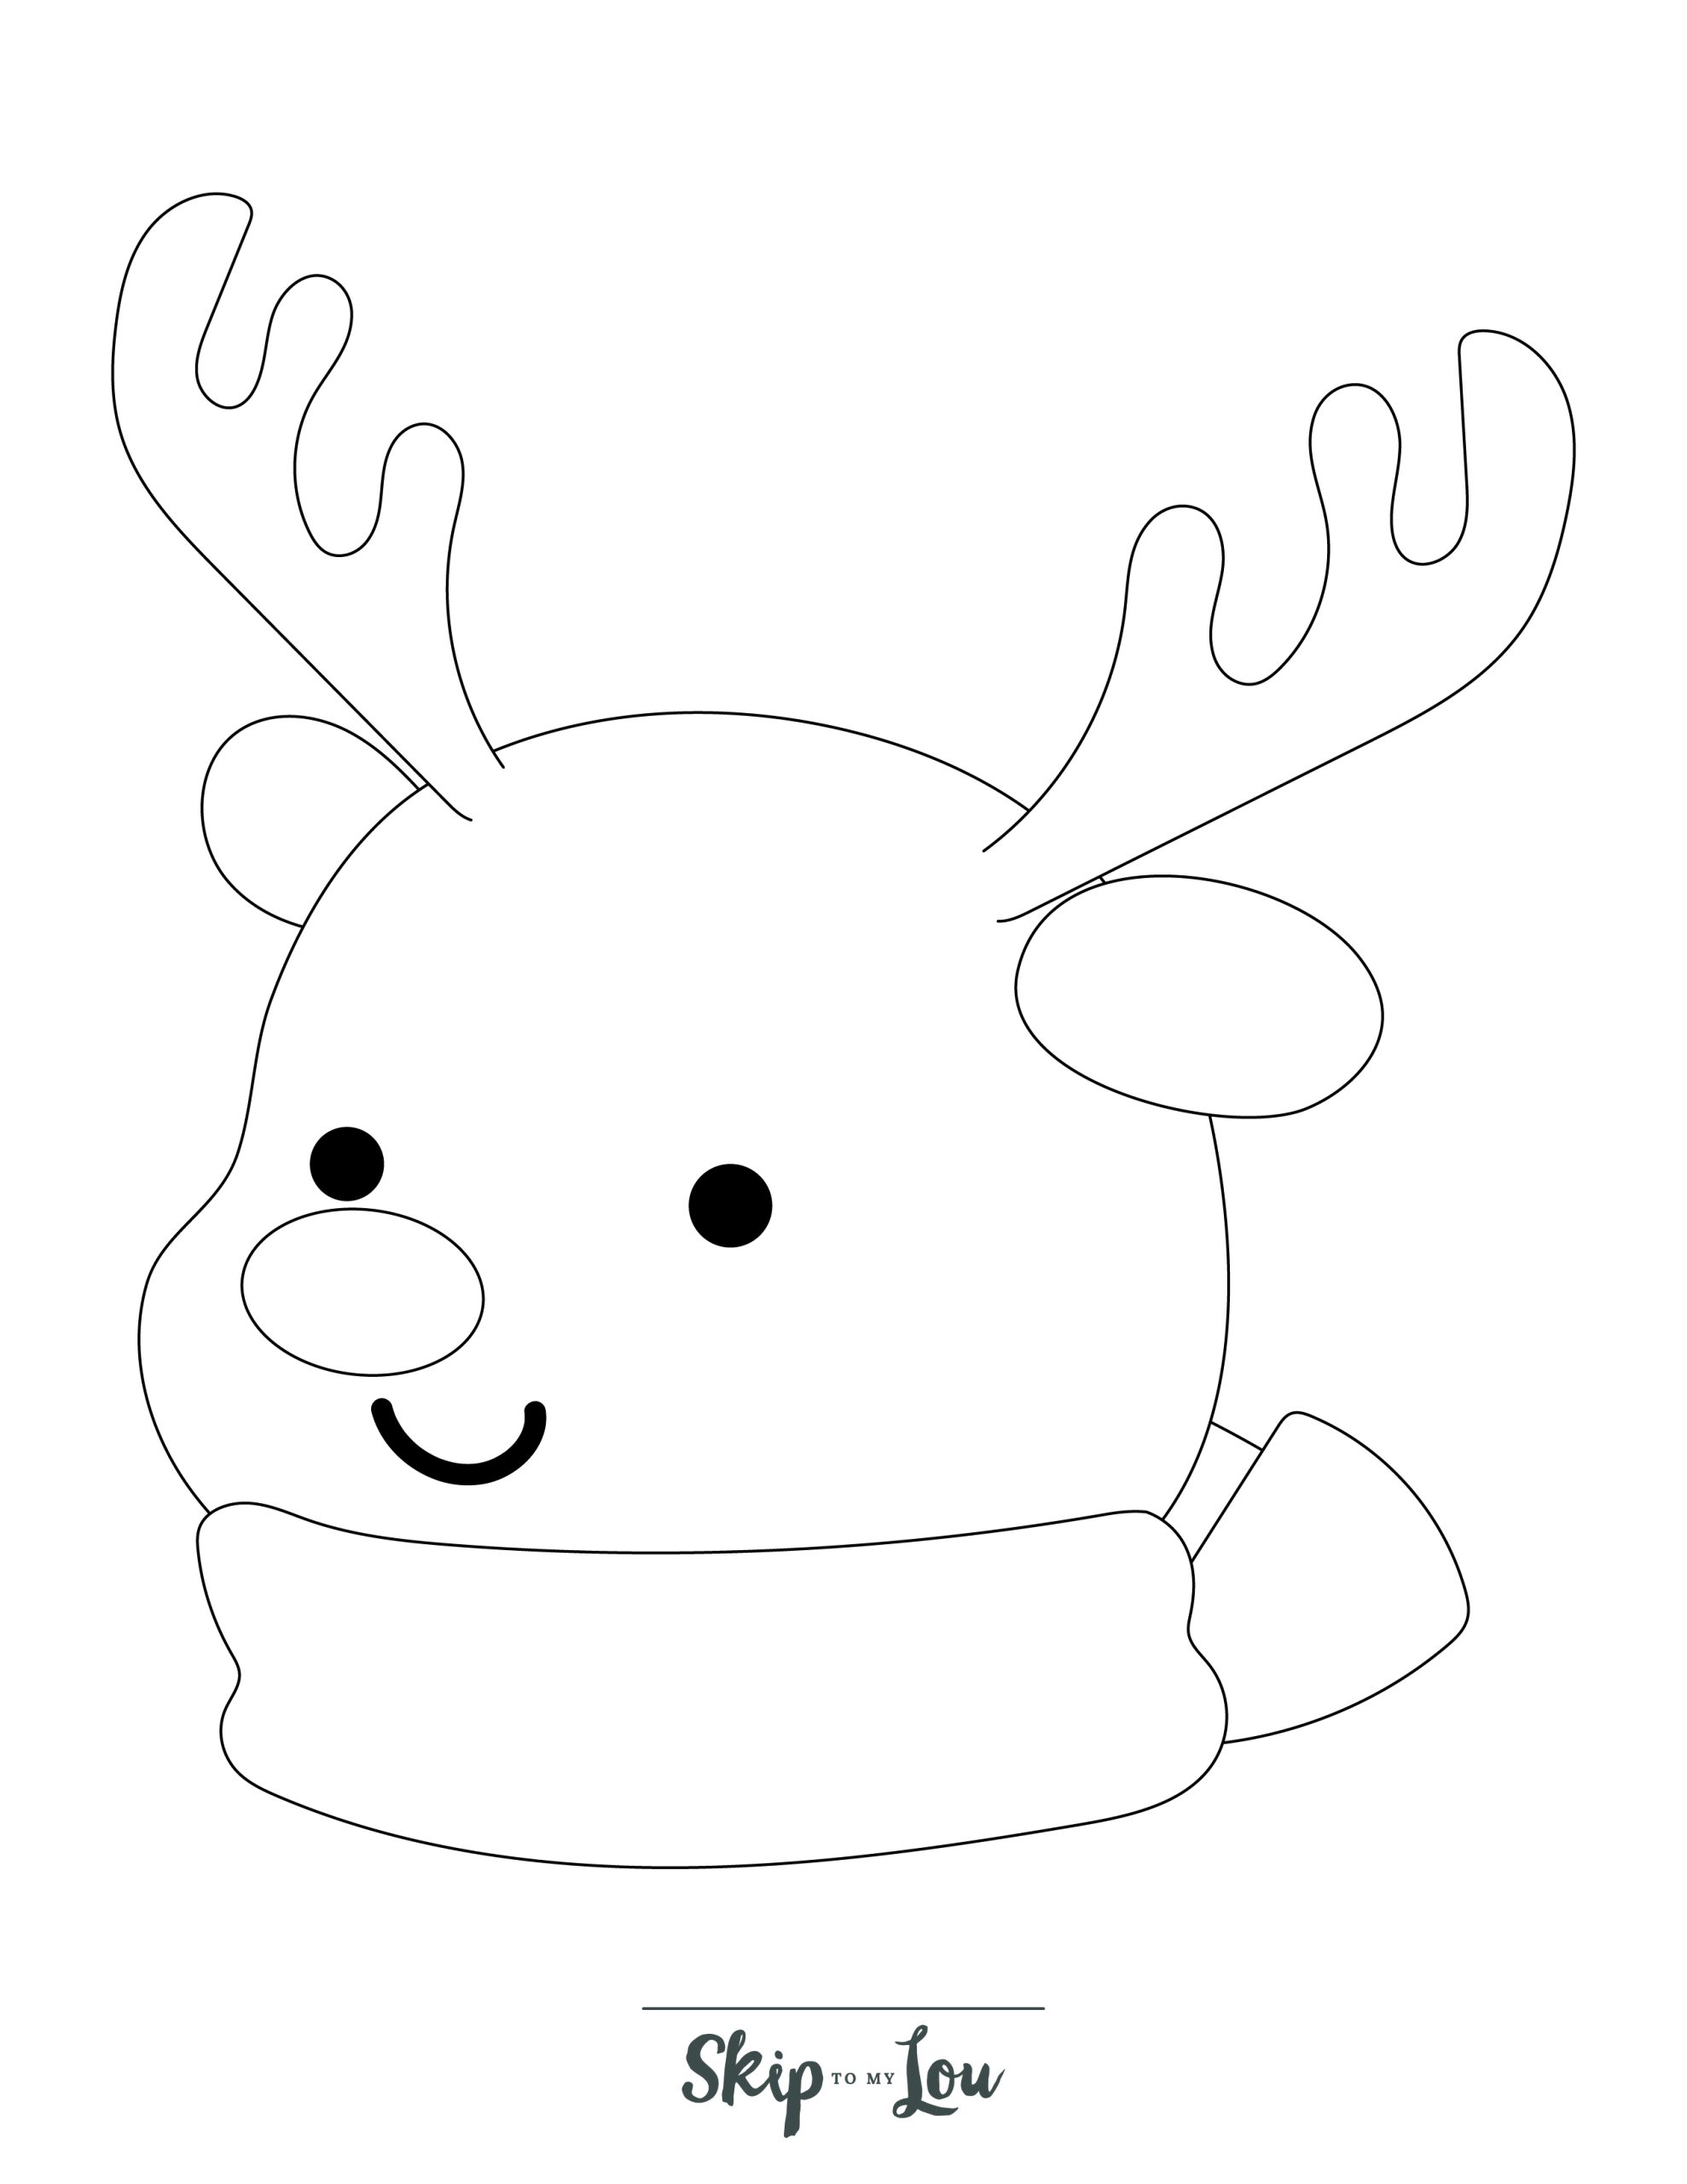 Reindeer Coloring Page 12 - Line drawing of a happy reindeer face 